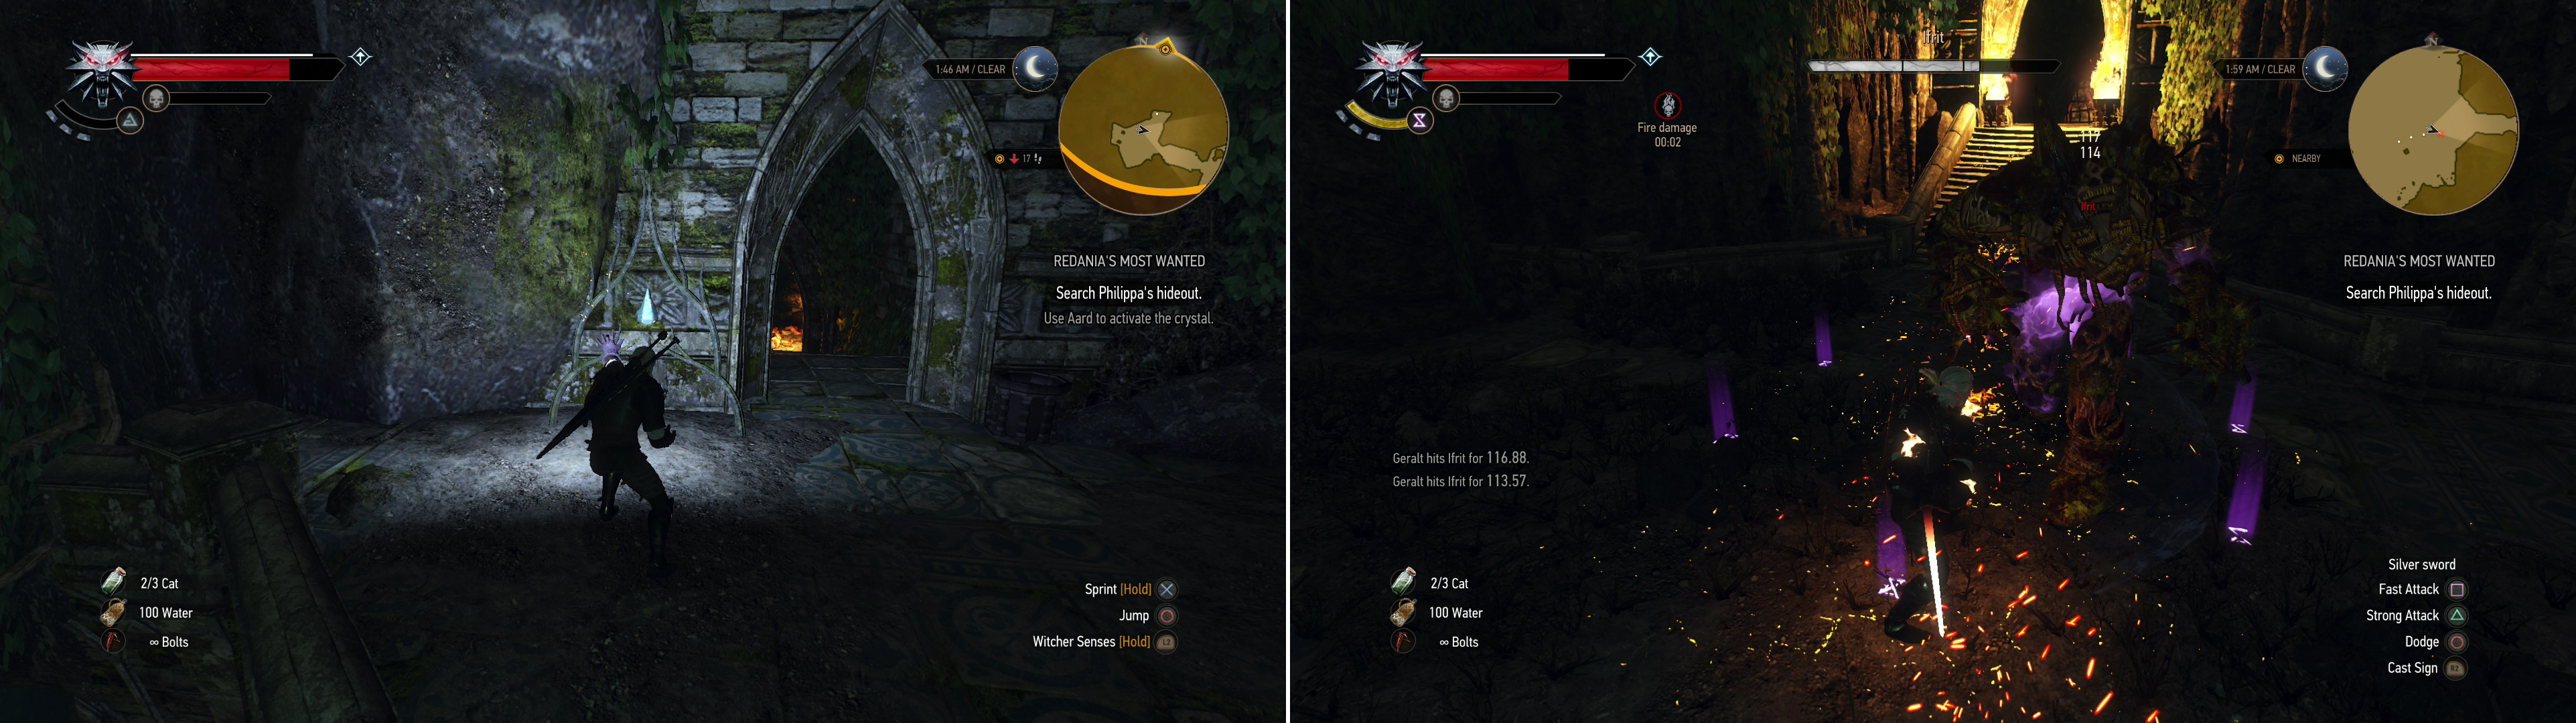 Charge up power crystals by hitting them with the Aard Sign (left). Guarding Phillipa's lab is an Ifrit (right).